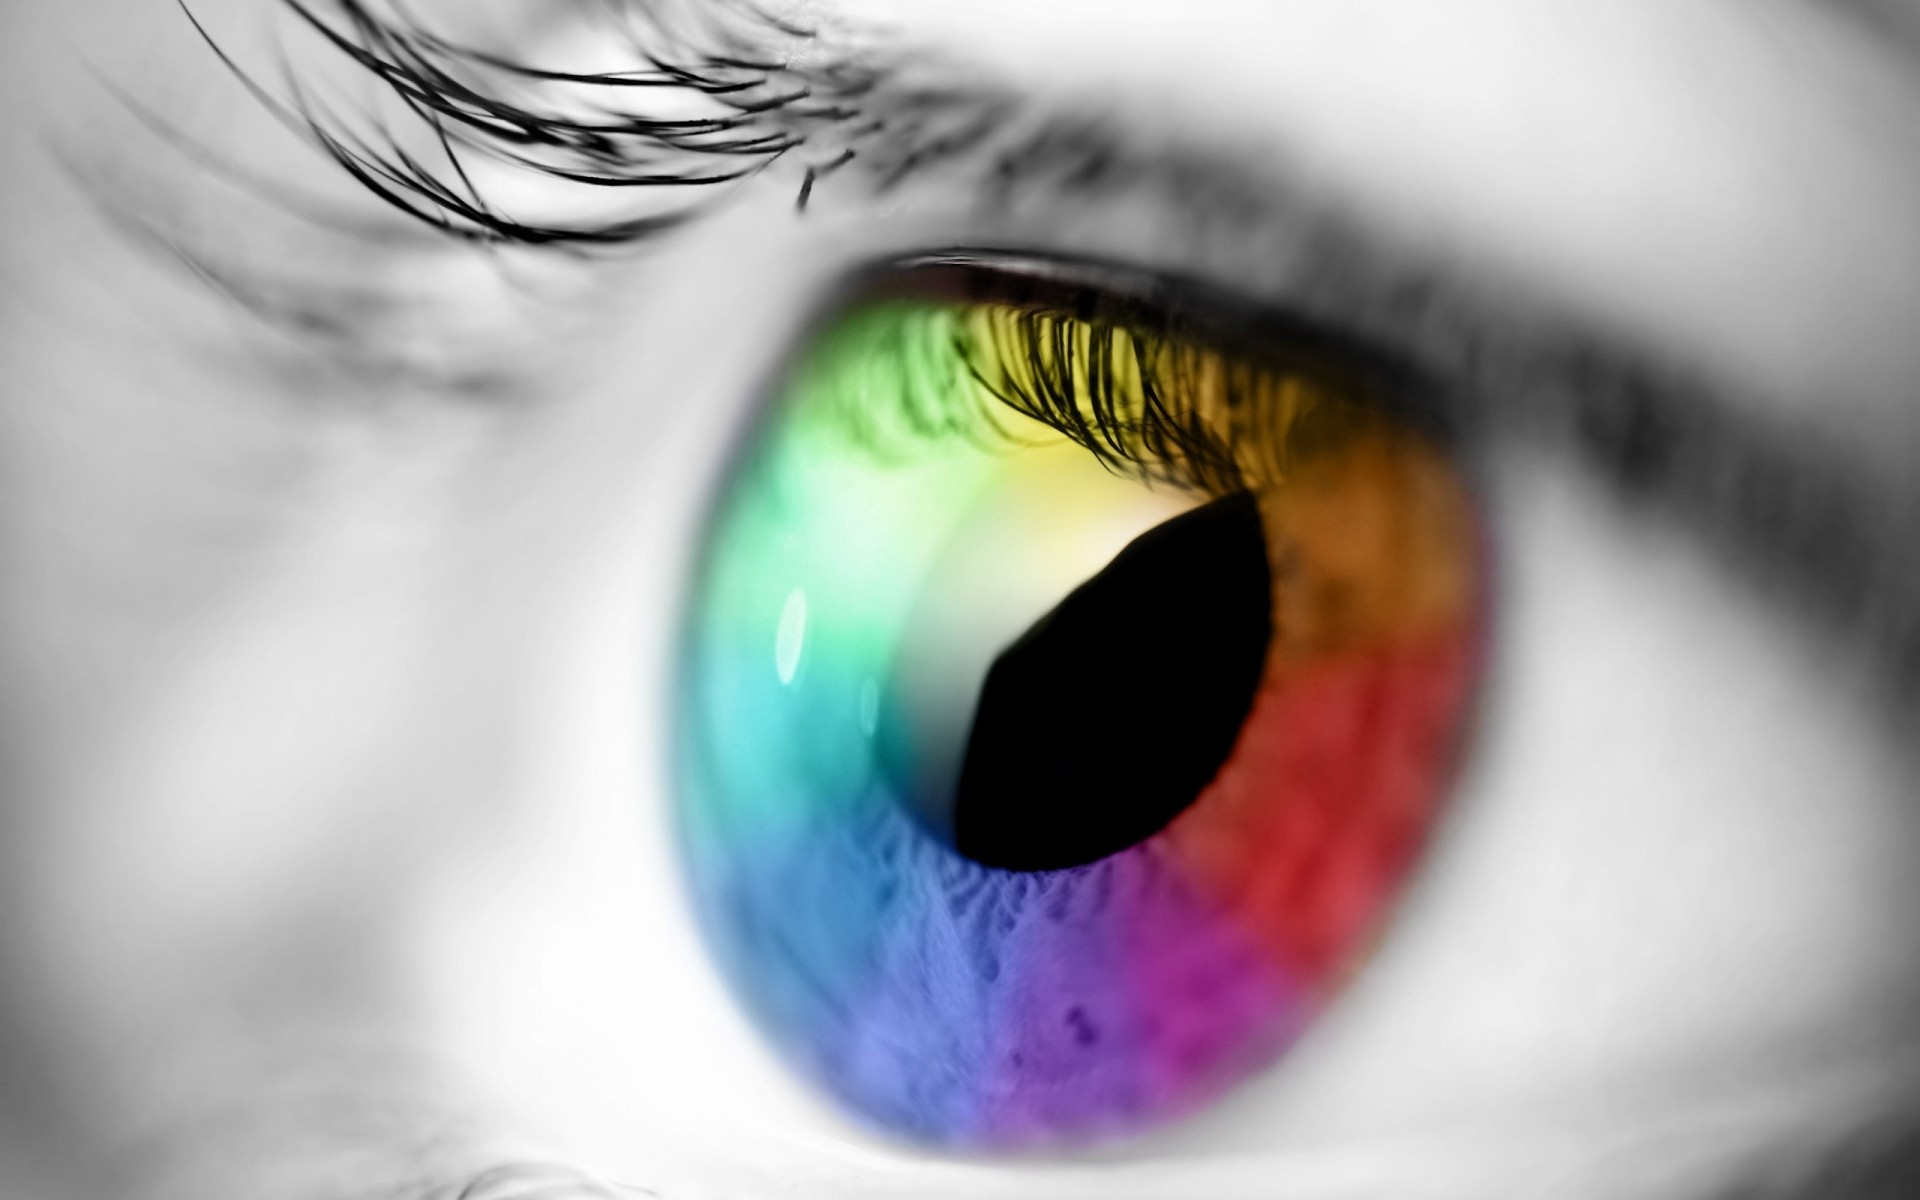 photo manipulation blur abstract color eye